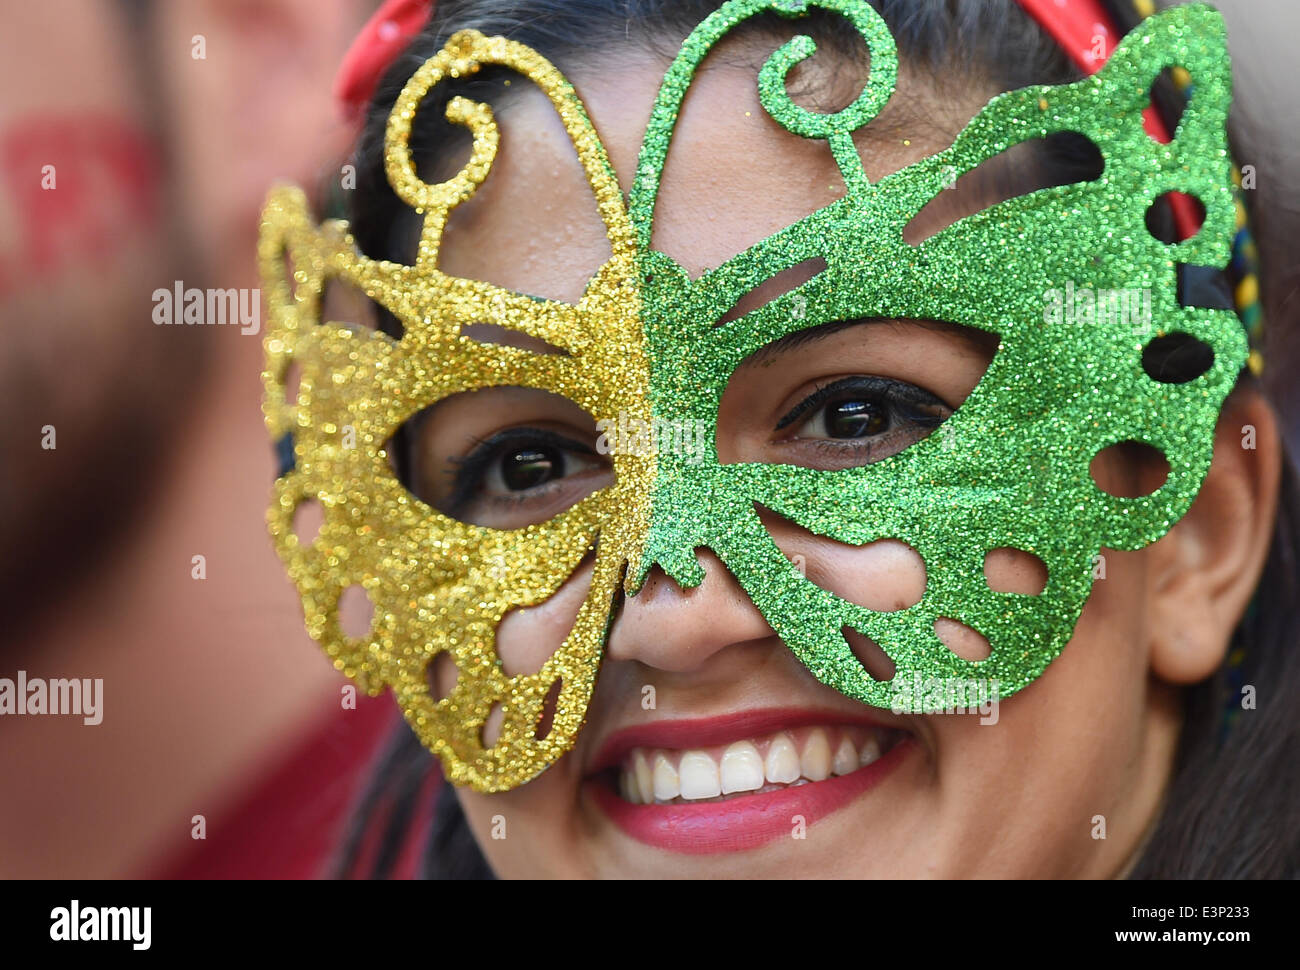 Brasilia, Brazil. 26th June, 2014. A supporter of Brazil is seen prior to the FIFA World Cup 2014 group G preliminary round match between Portugal and Ghana at the Estadio National Stadium in Brasilia, Brazil, on 26 June 2014 Credit: © dpa picture alliance/Alamy Live News  Stock Photo